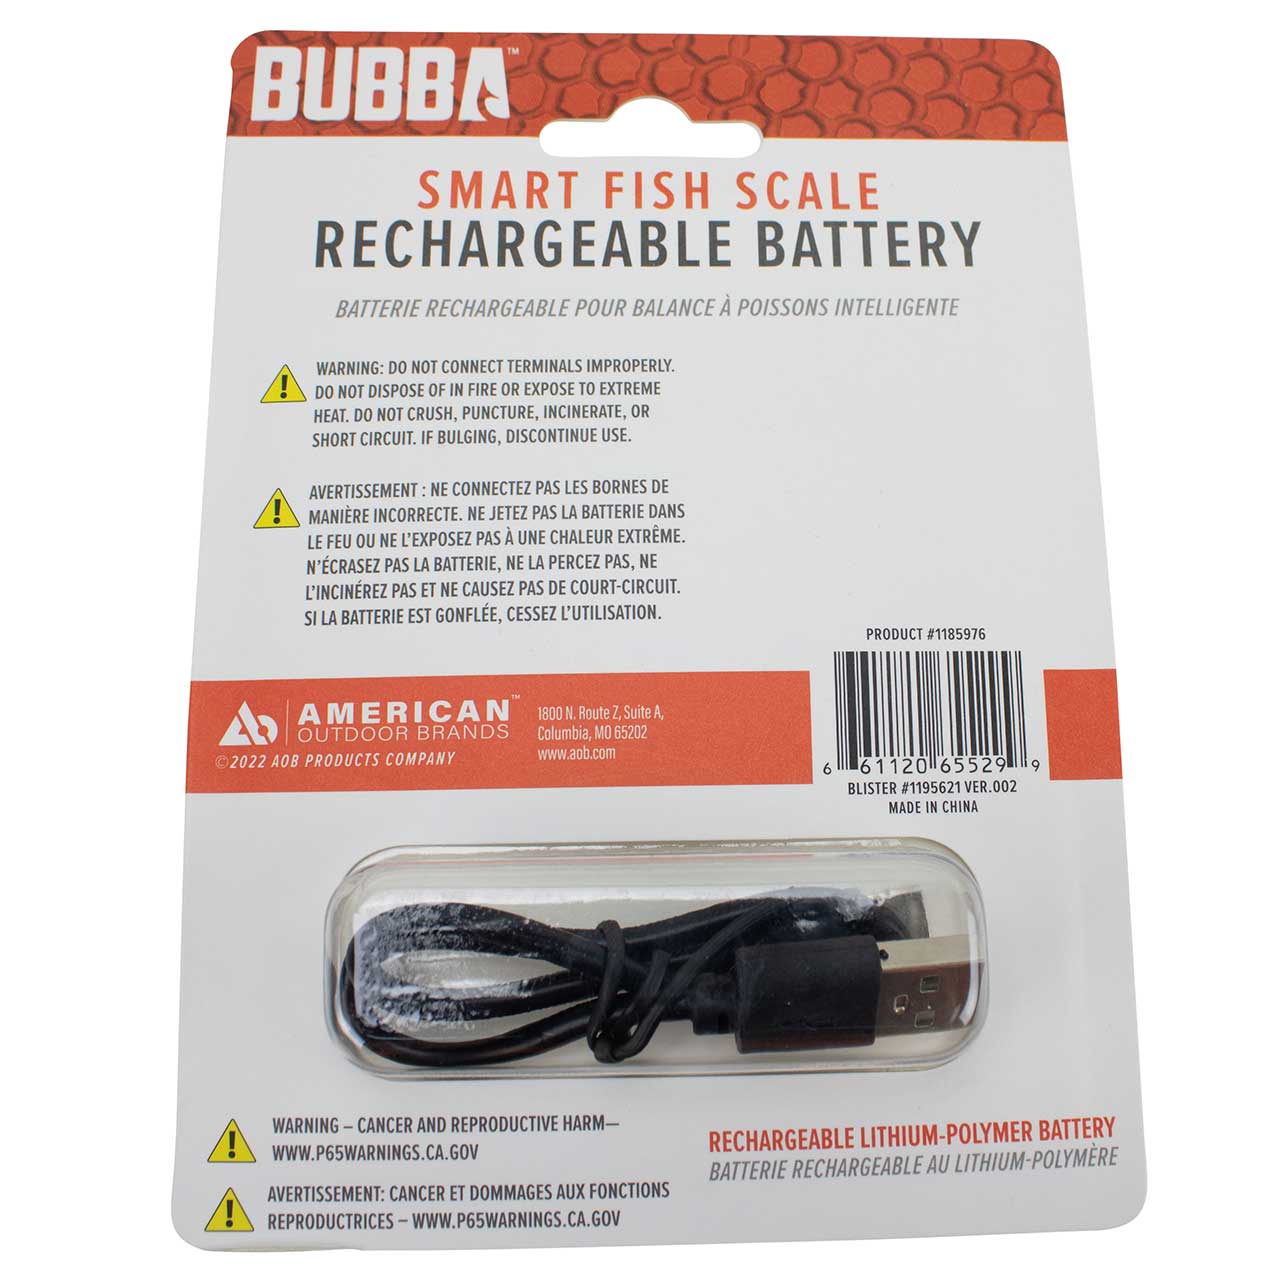 Bubba Blade Smart Fish Scale Rechargeable Battery